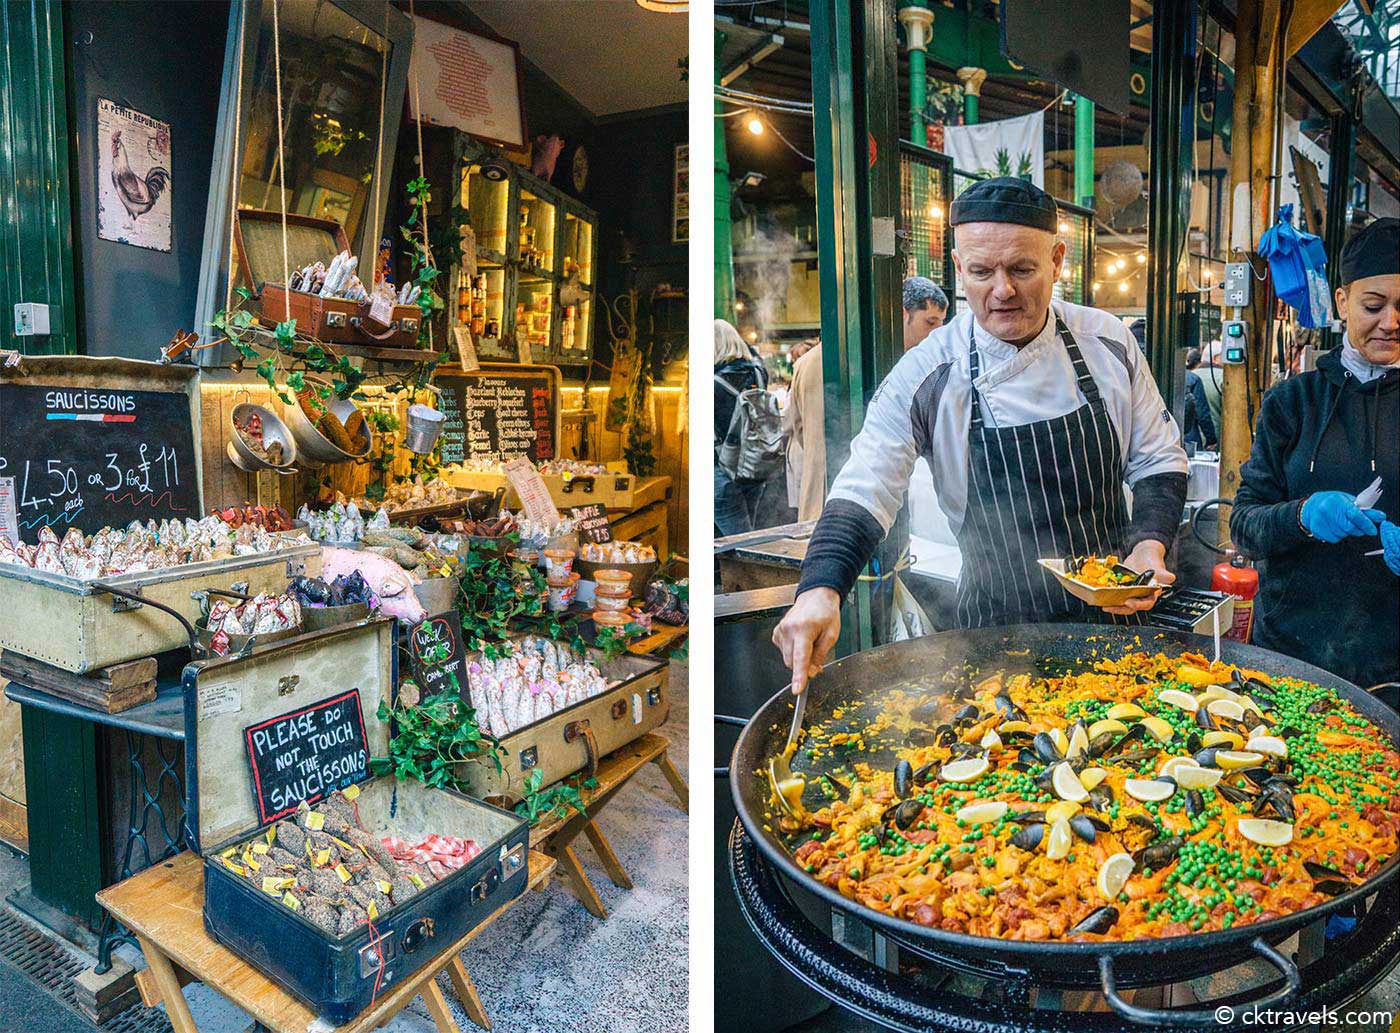 paella stall at Borough Market guide - London's most famous food market